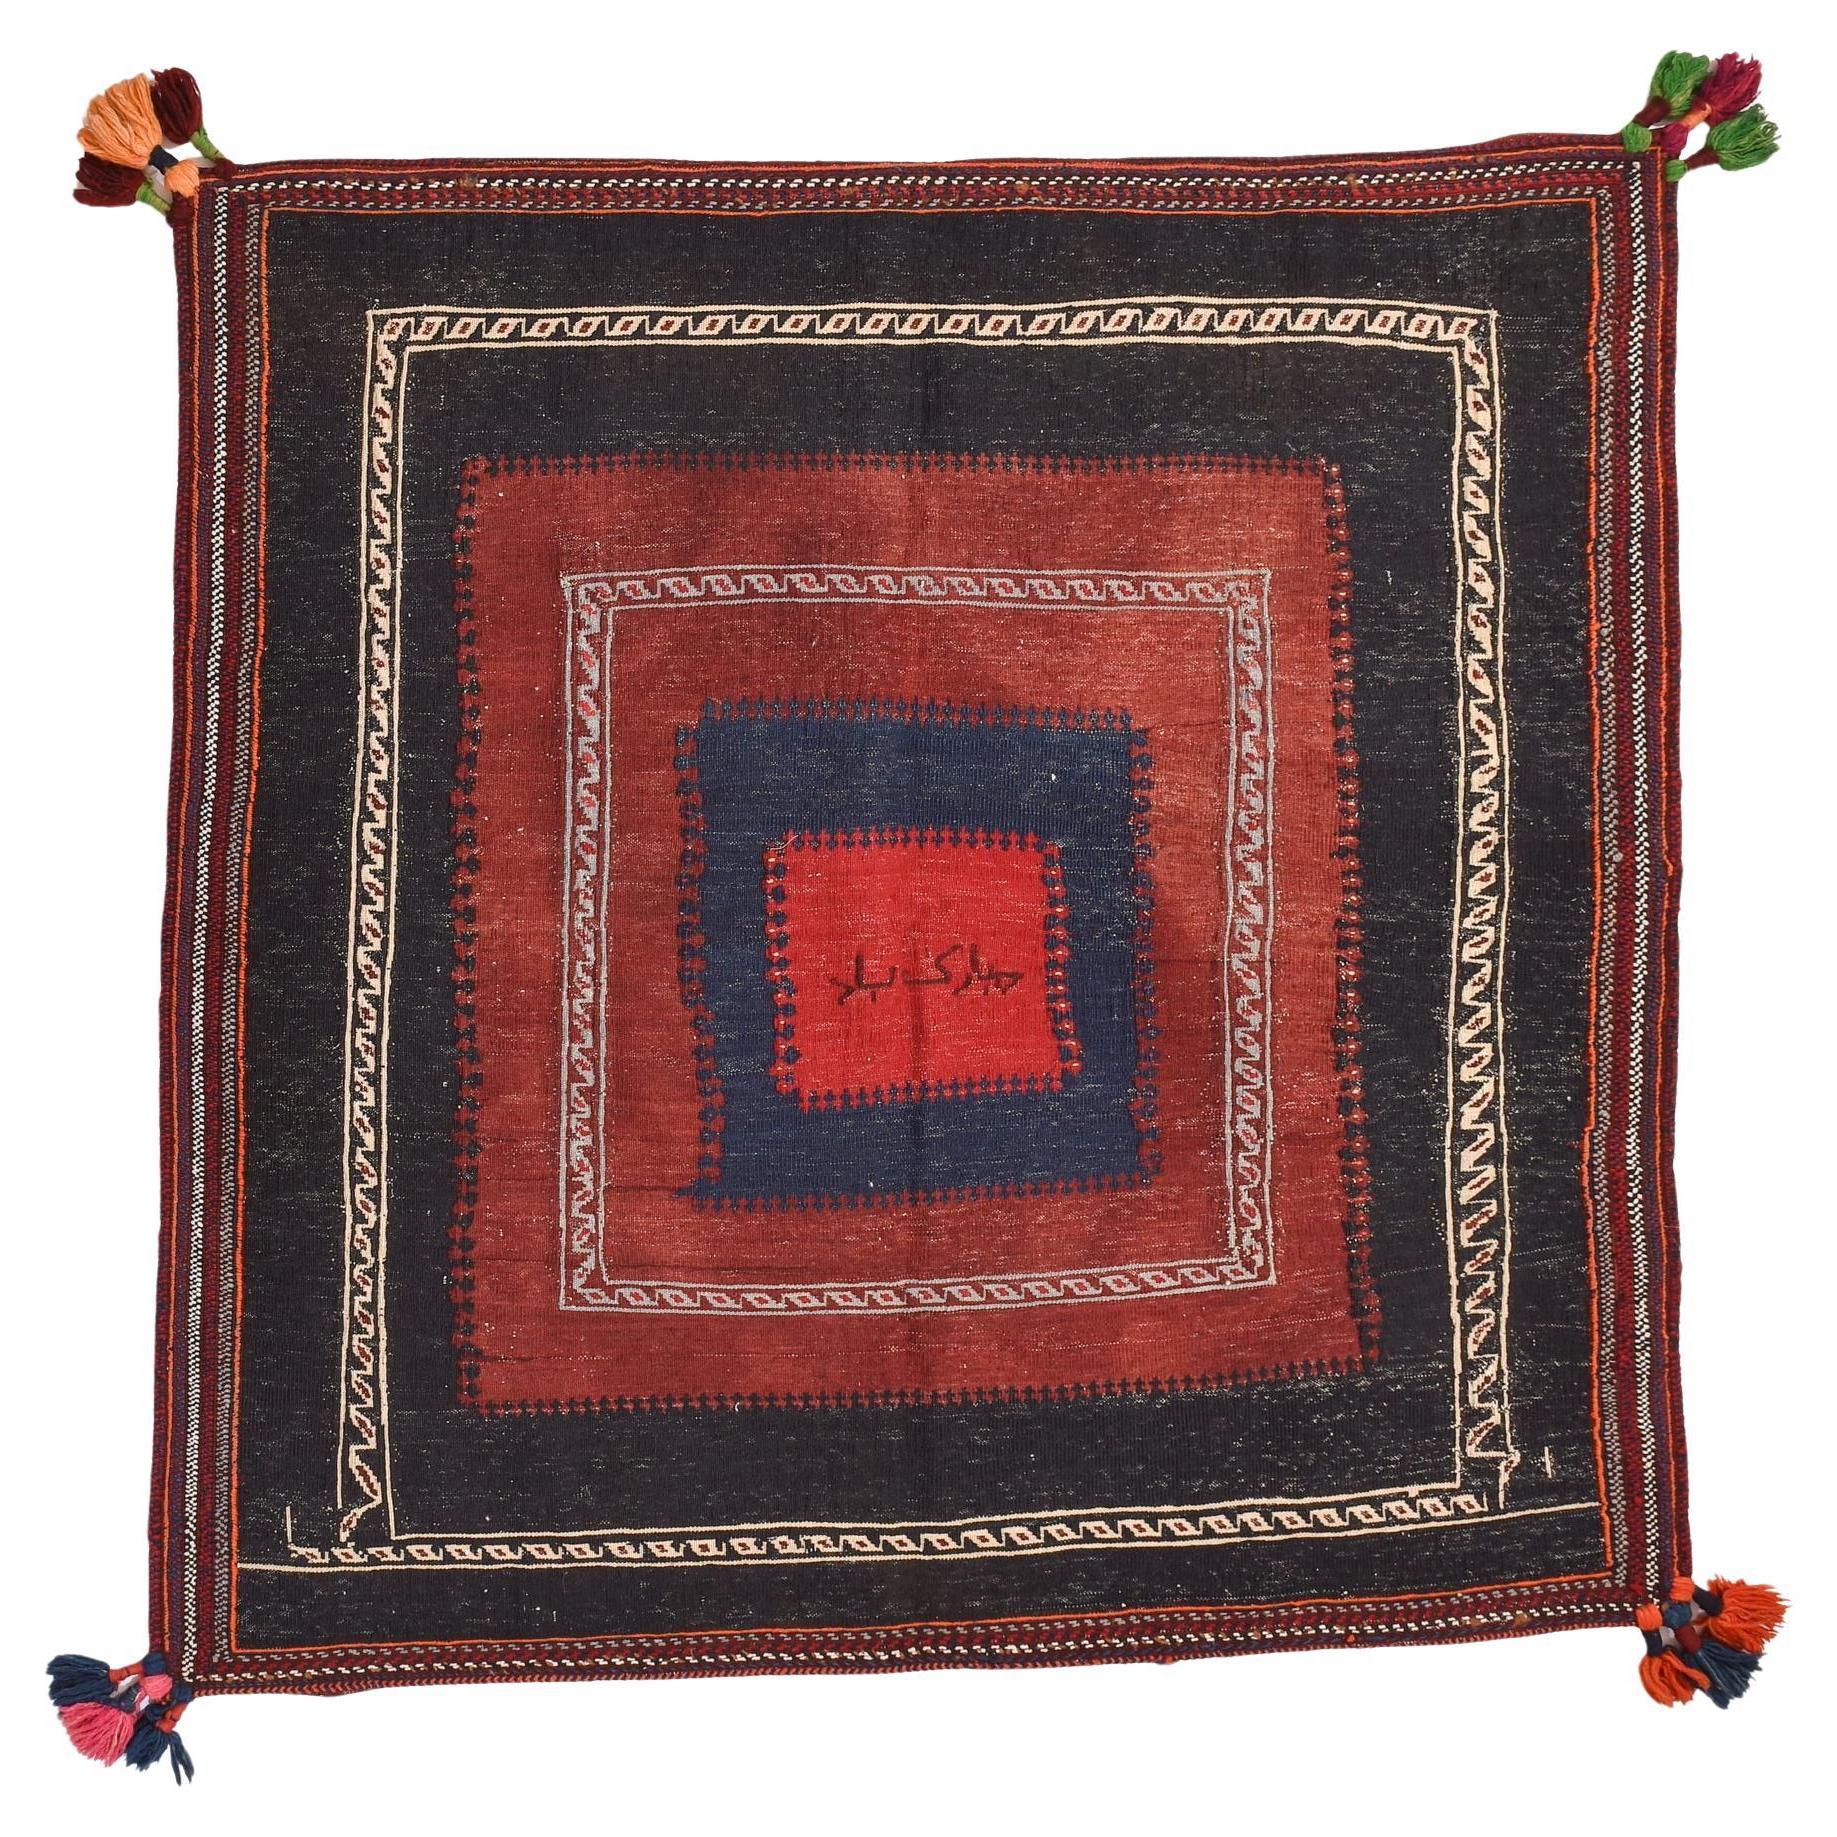 Kilim - Tablecloth with Central Greeting from My Private Collection For Sale